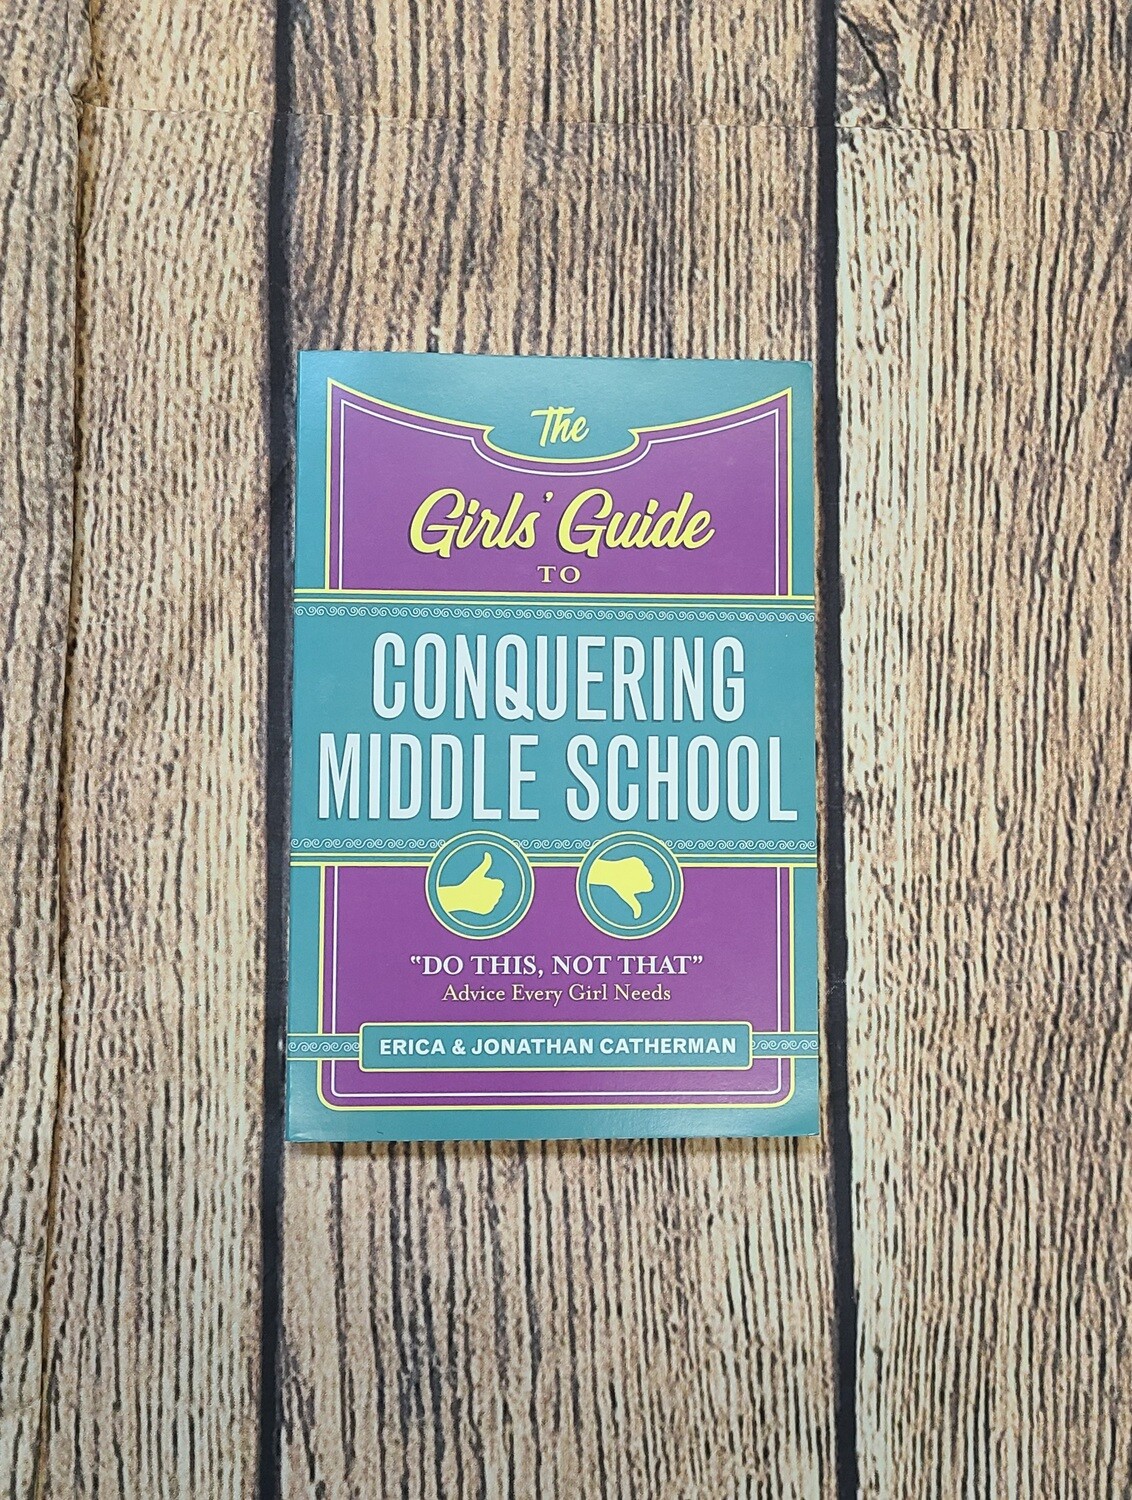 The Girls' Guide to Conquering Middle School by Erica and Jonathan Catherman